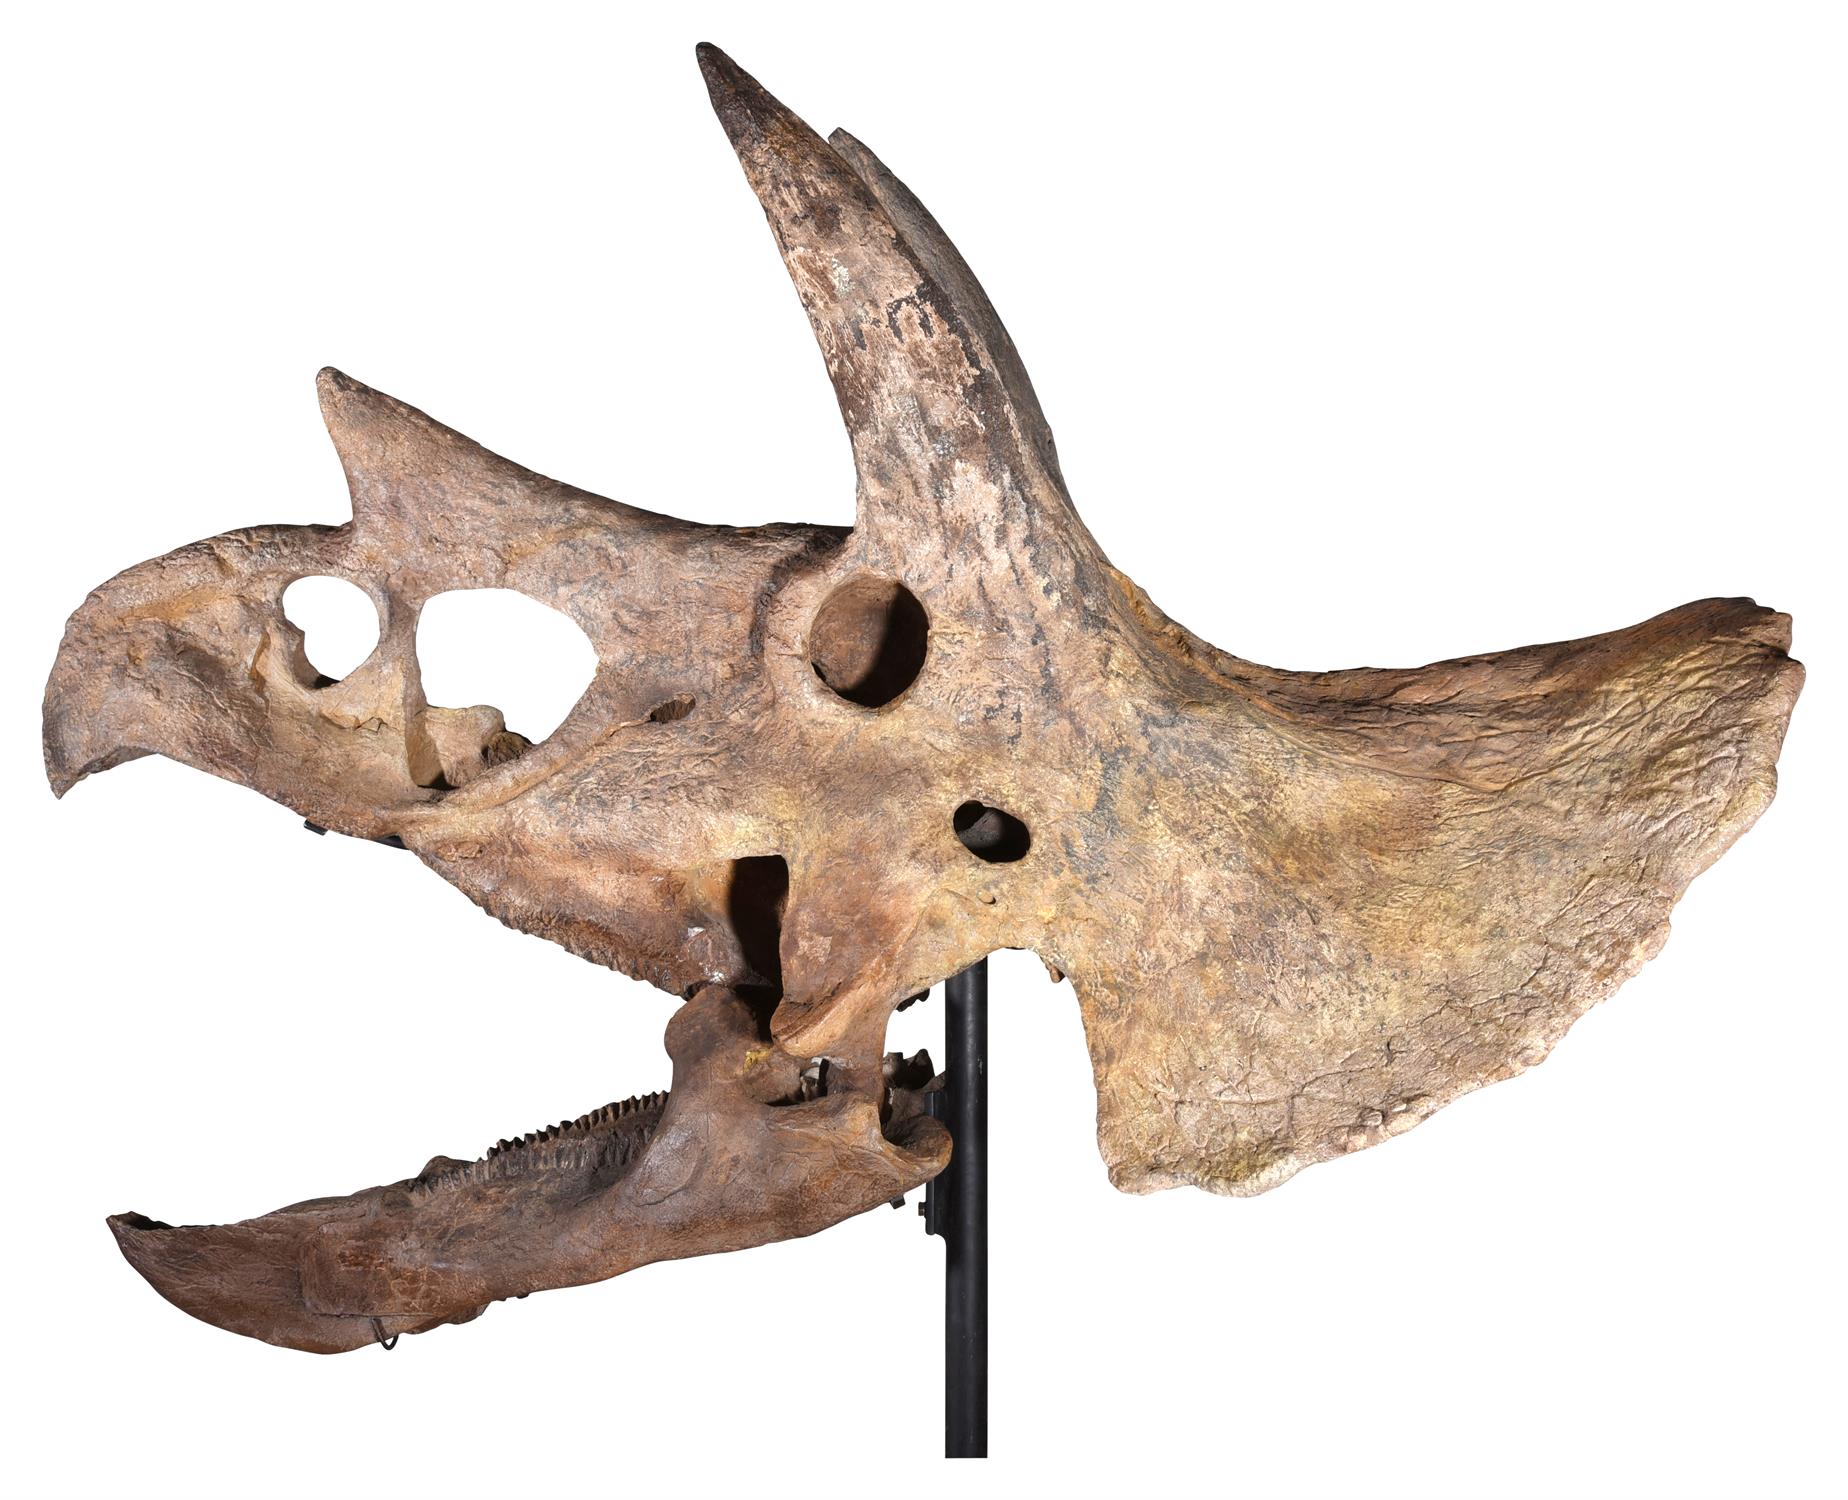 THE SKULL OF A TRICERATOPS, HELL CREEK FORMATION - Image 10 of 12